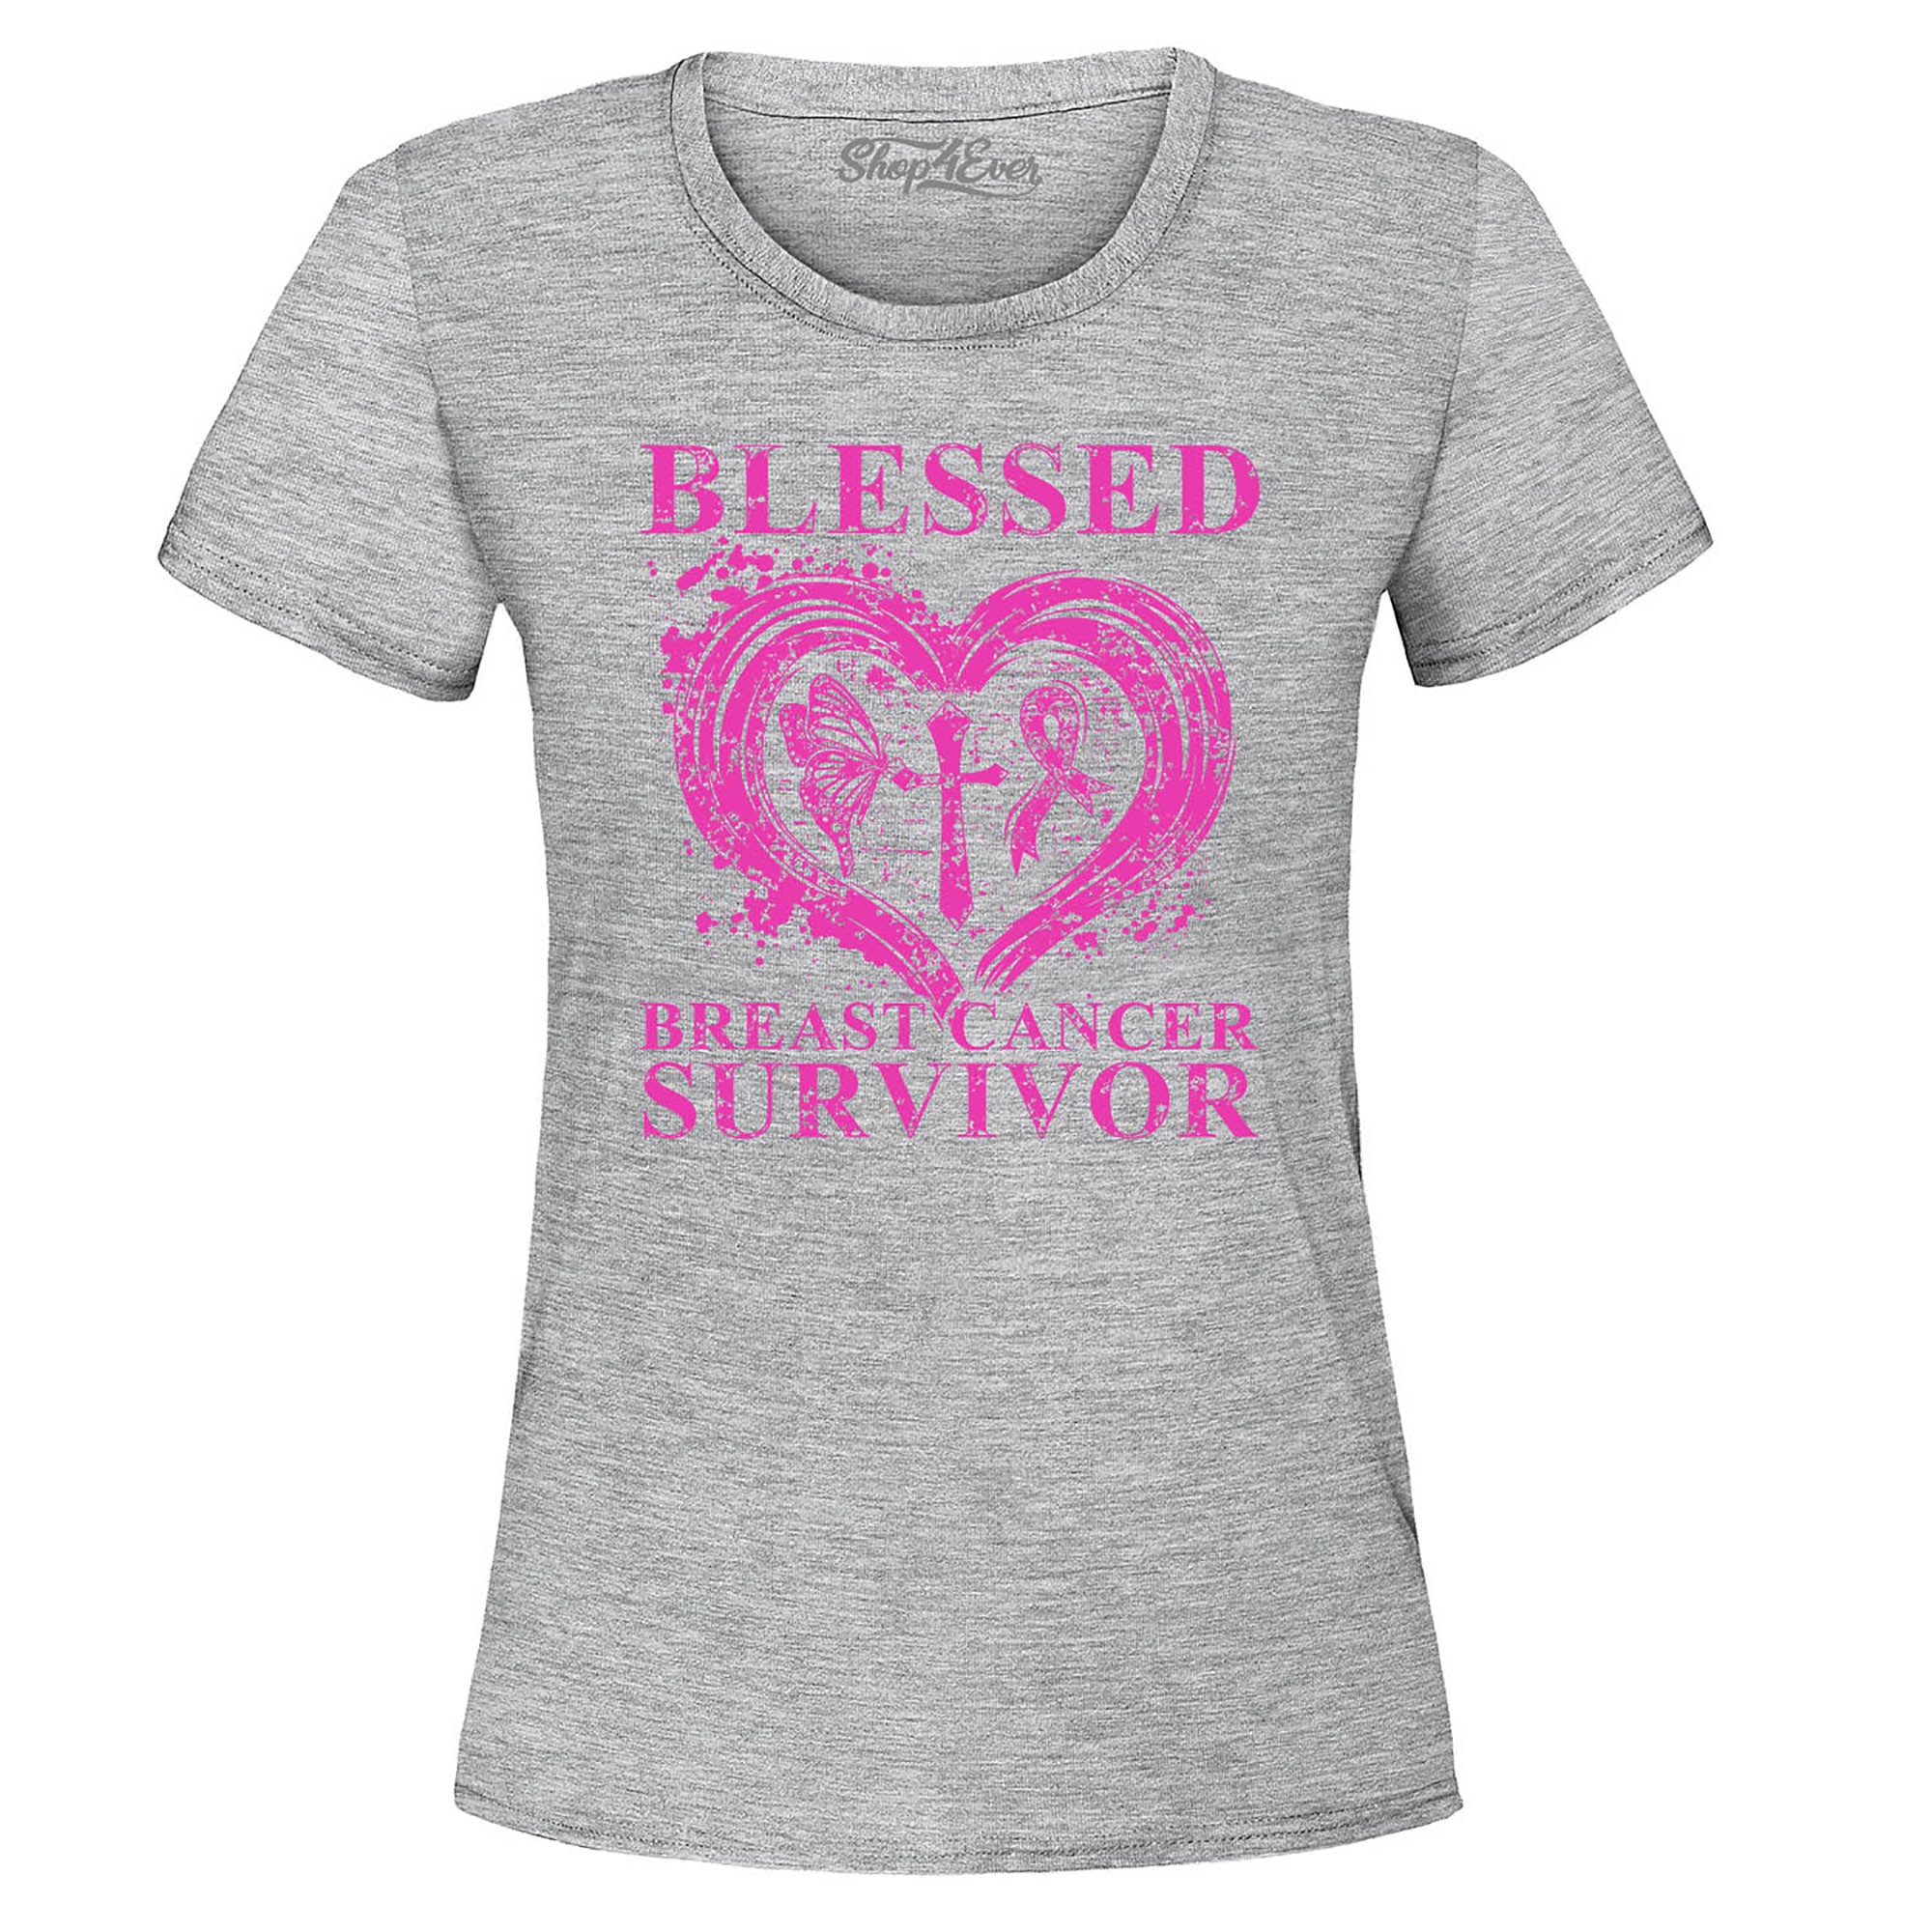 Blessed Breast Cancer Awareness Women's T-Shirt